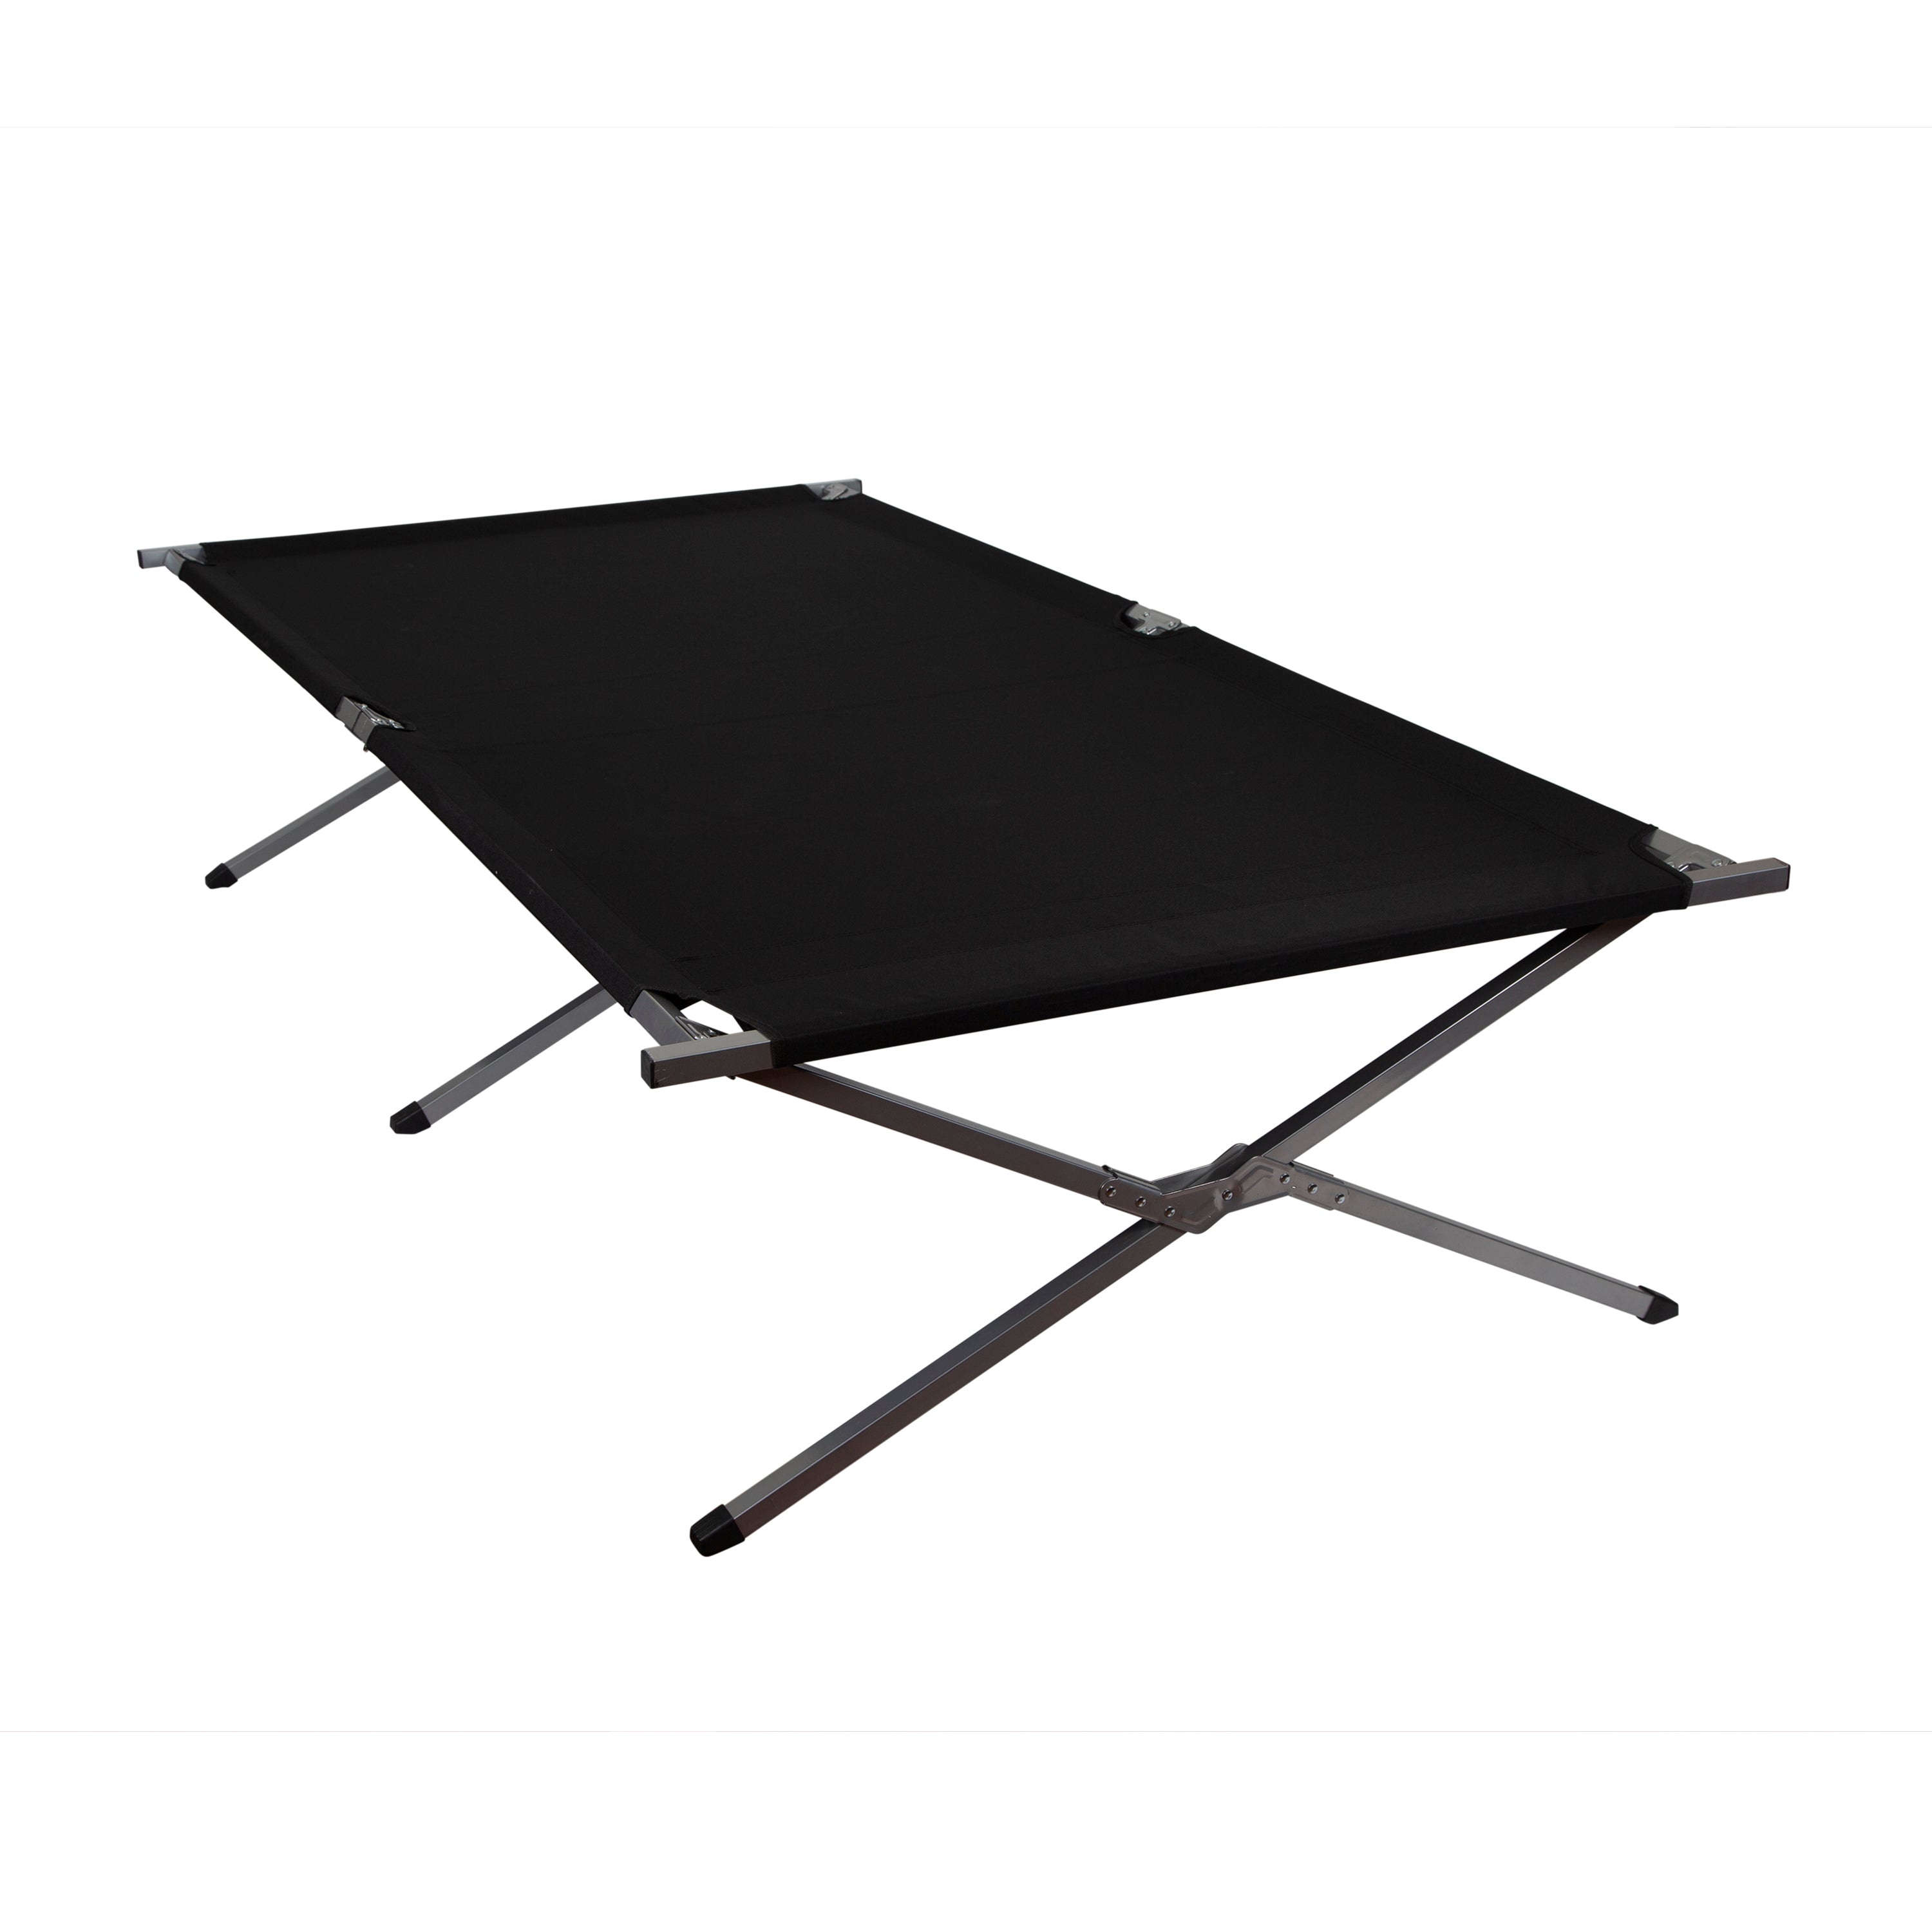 Base Camp Folding Cot - 80 X 30 X 19.25 Inches